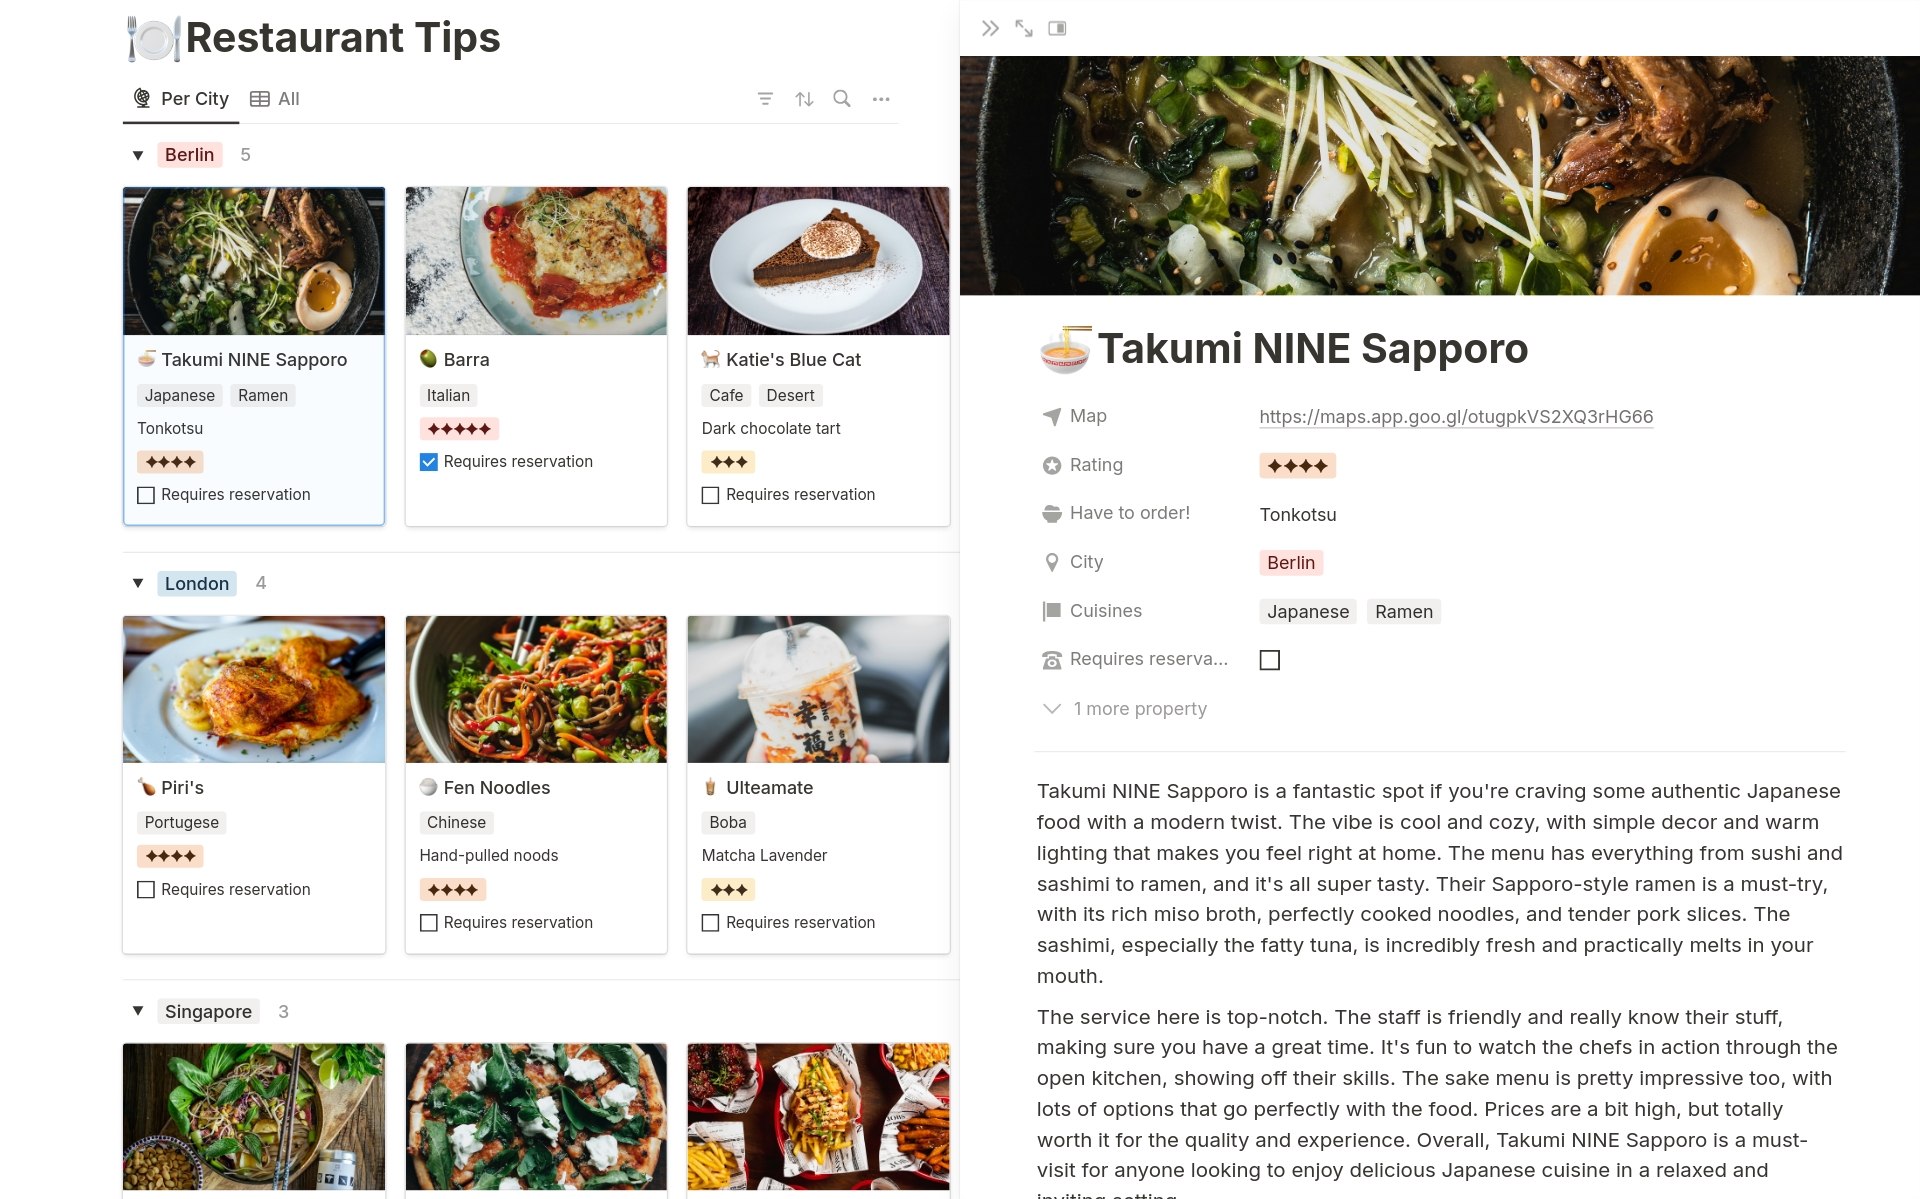 A restaurant recommendations site template for foodies to share their favorite places and must-try items.